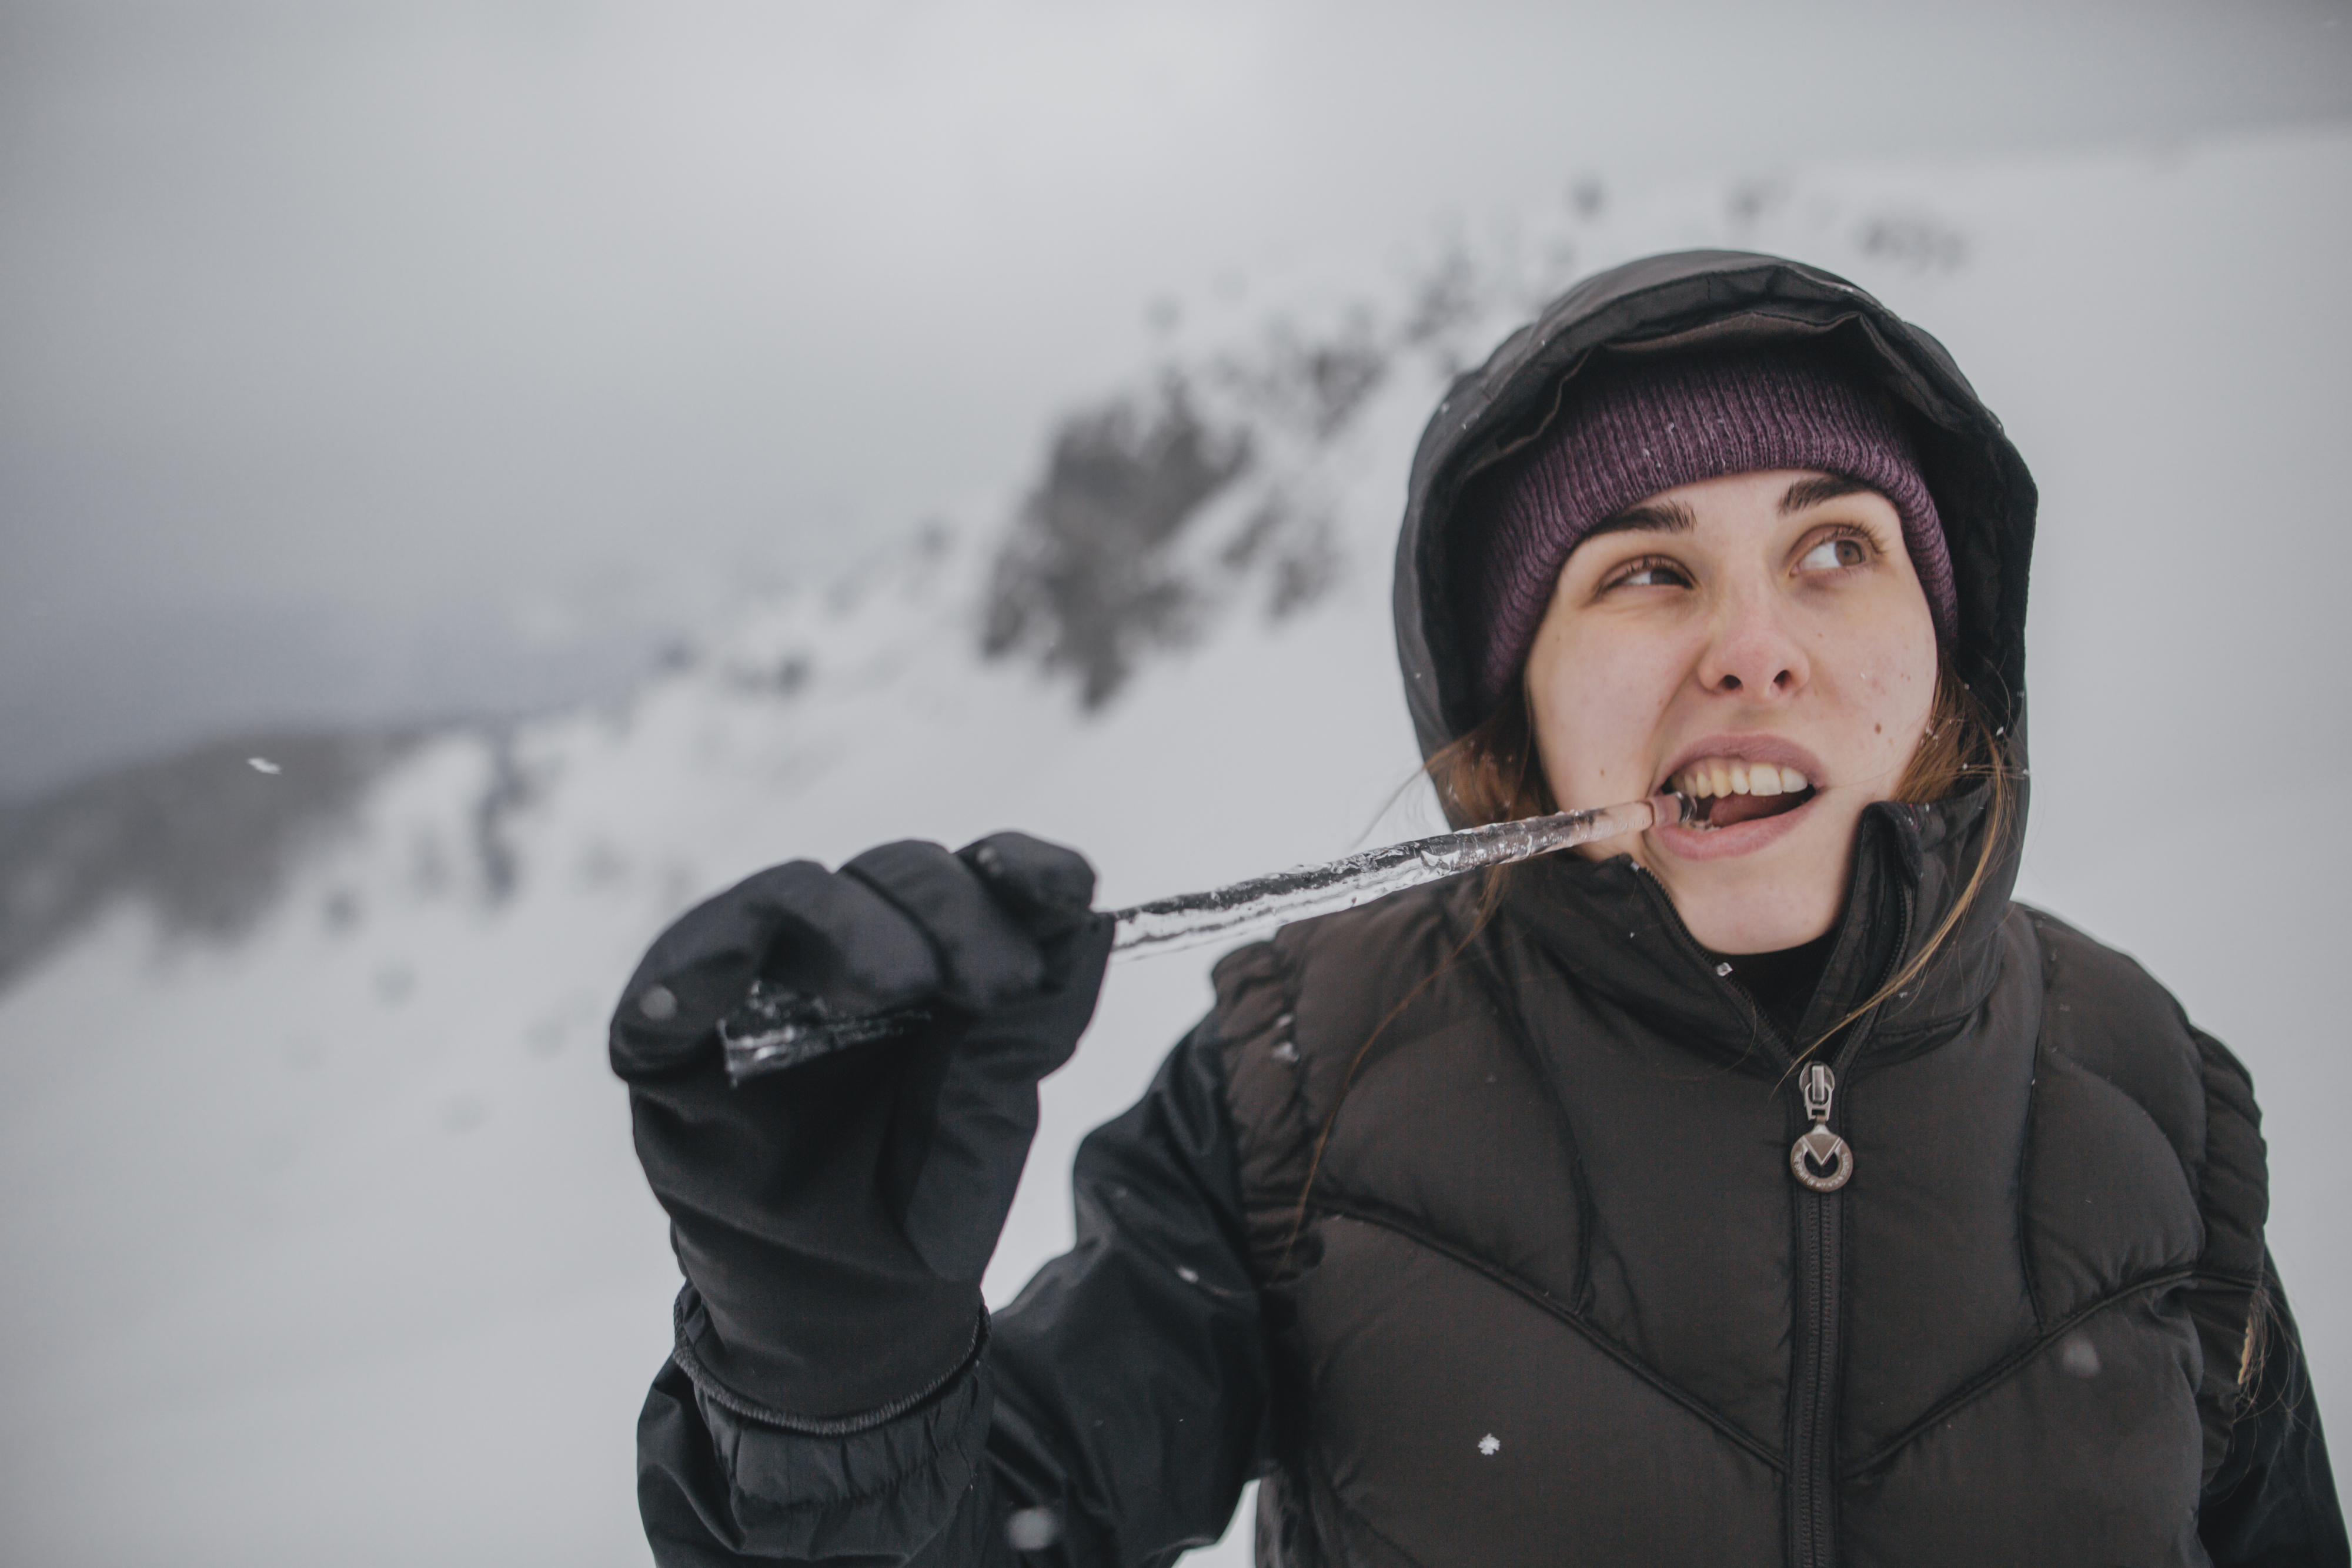 a person hitting an icicle